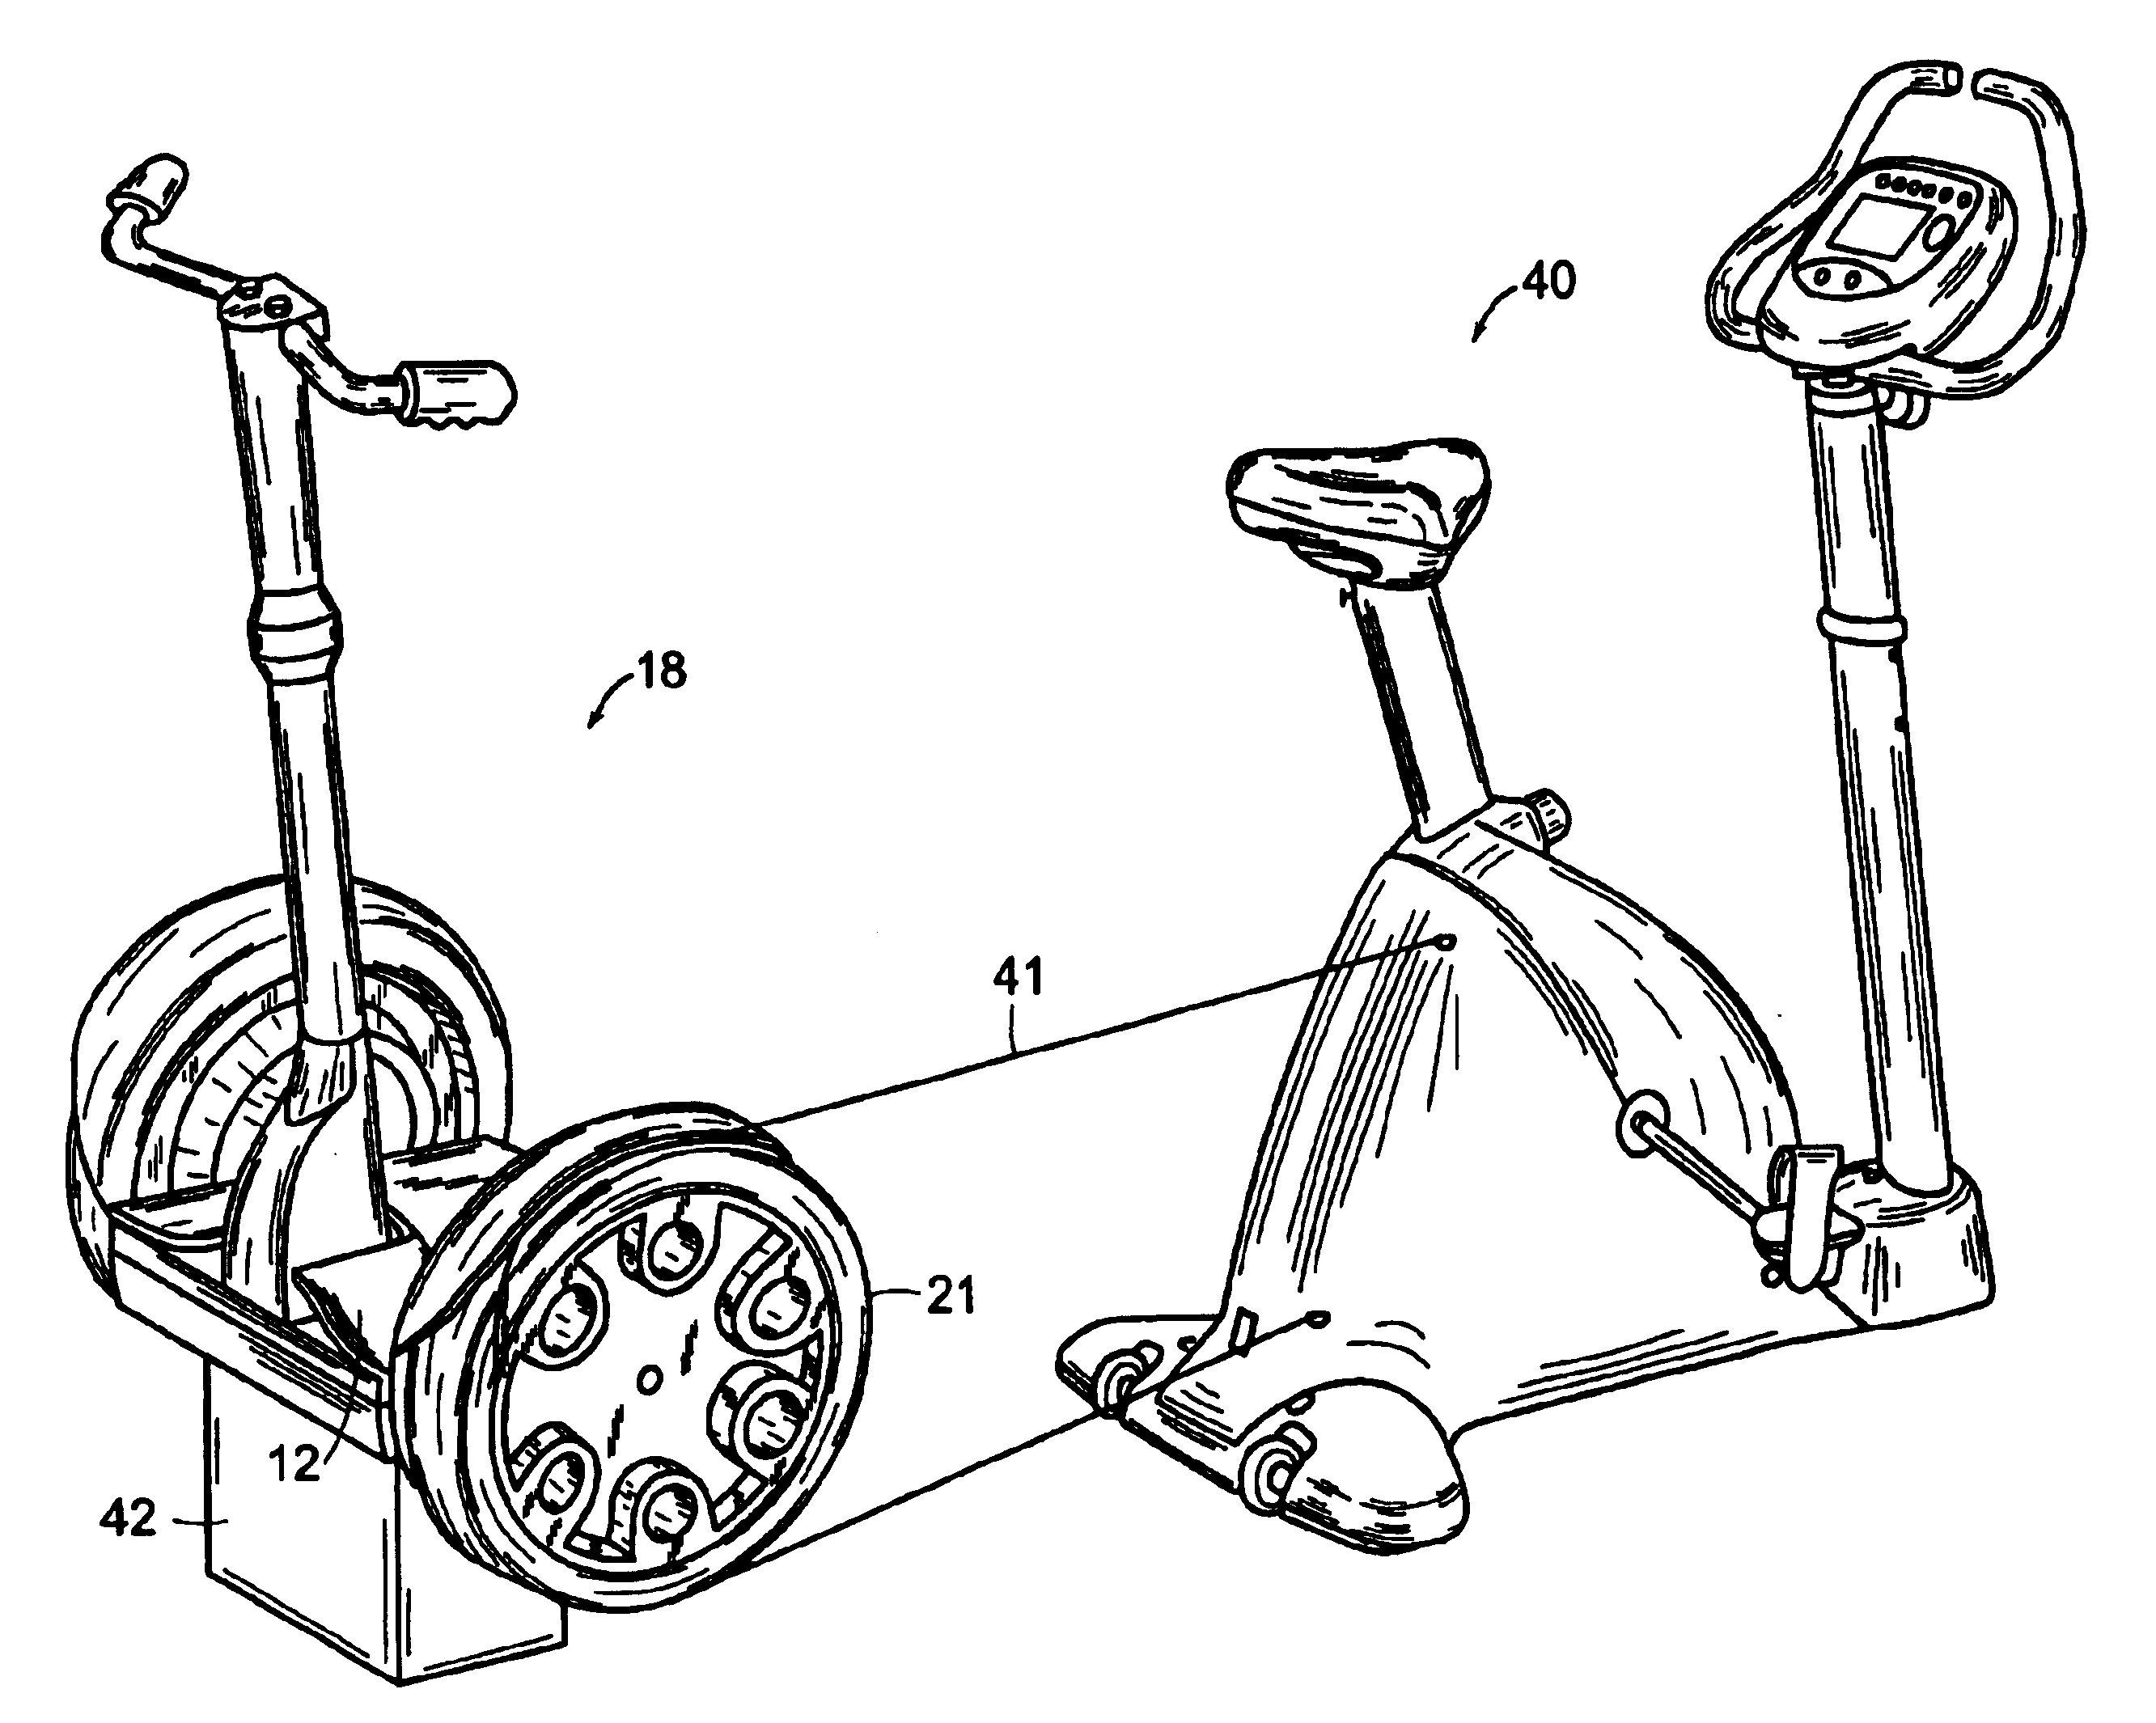 Exercise mode for a personal transporter device